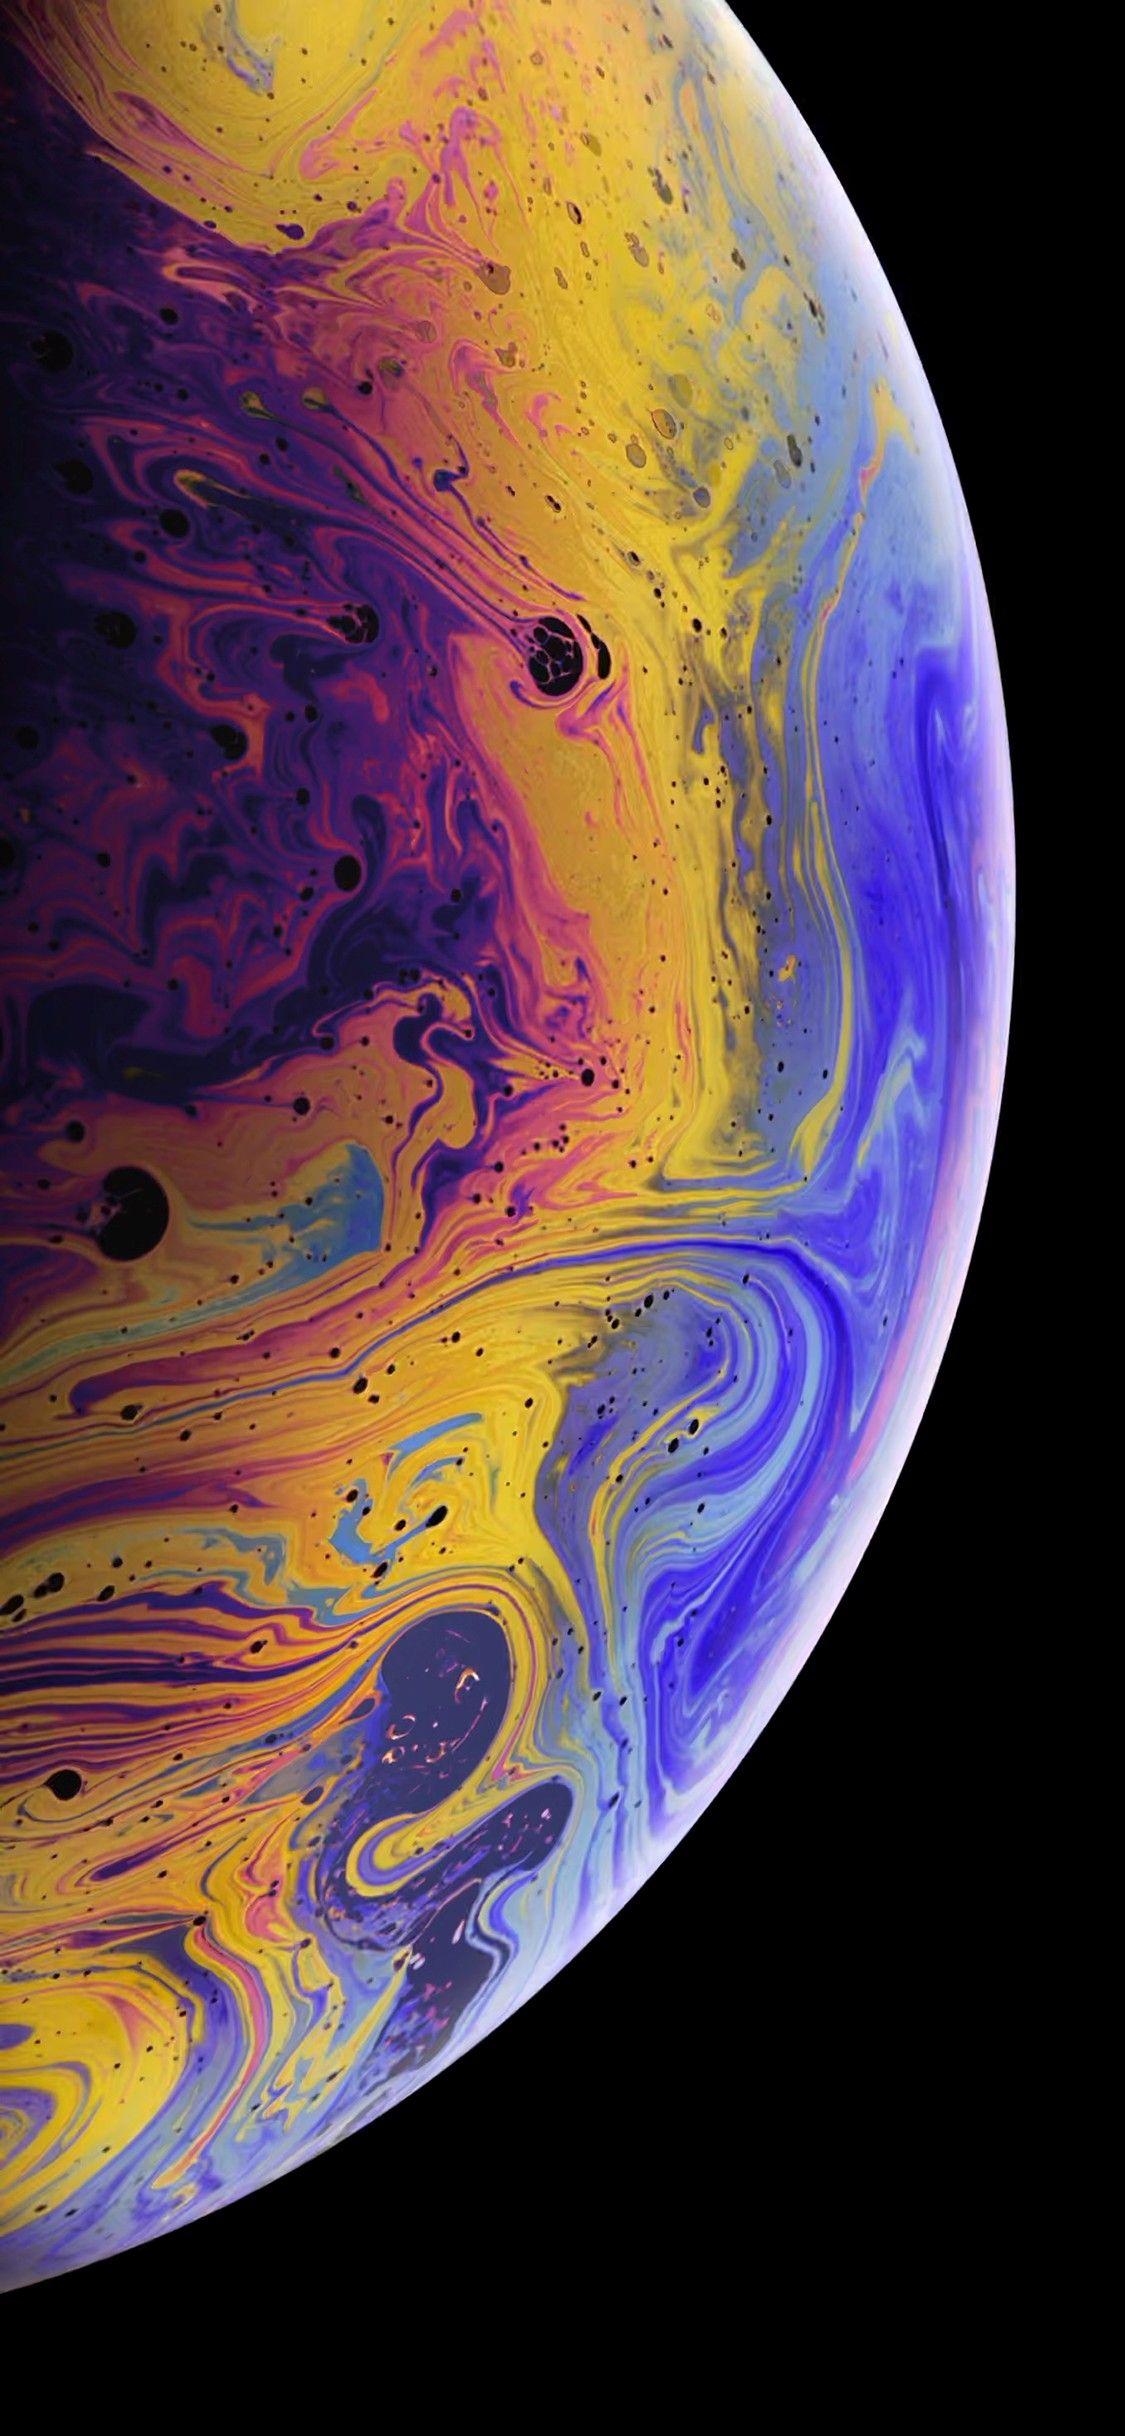 Download All iPhone Xs  Xs Max Live Wallpapers 3 Wallpaper Pack   NaldoTech